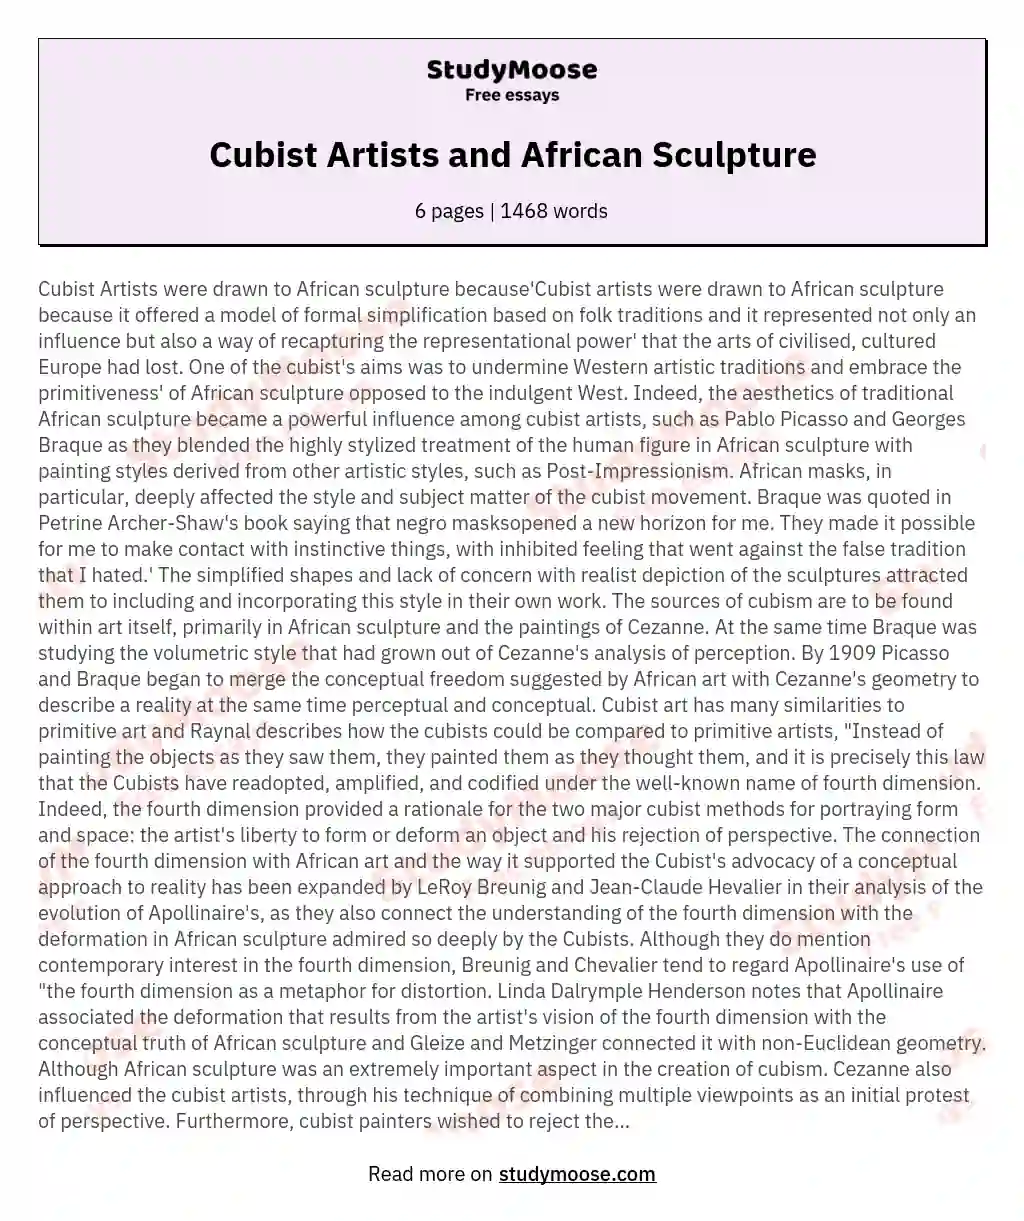 Cubist Artists and African Sculpture essay